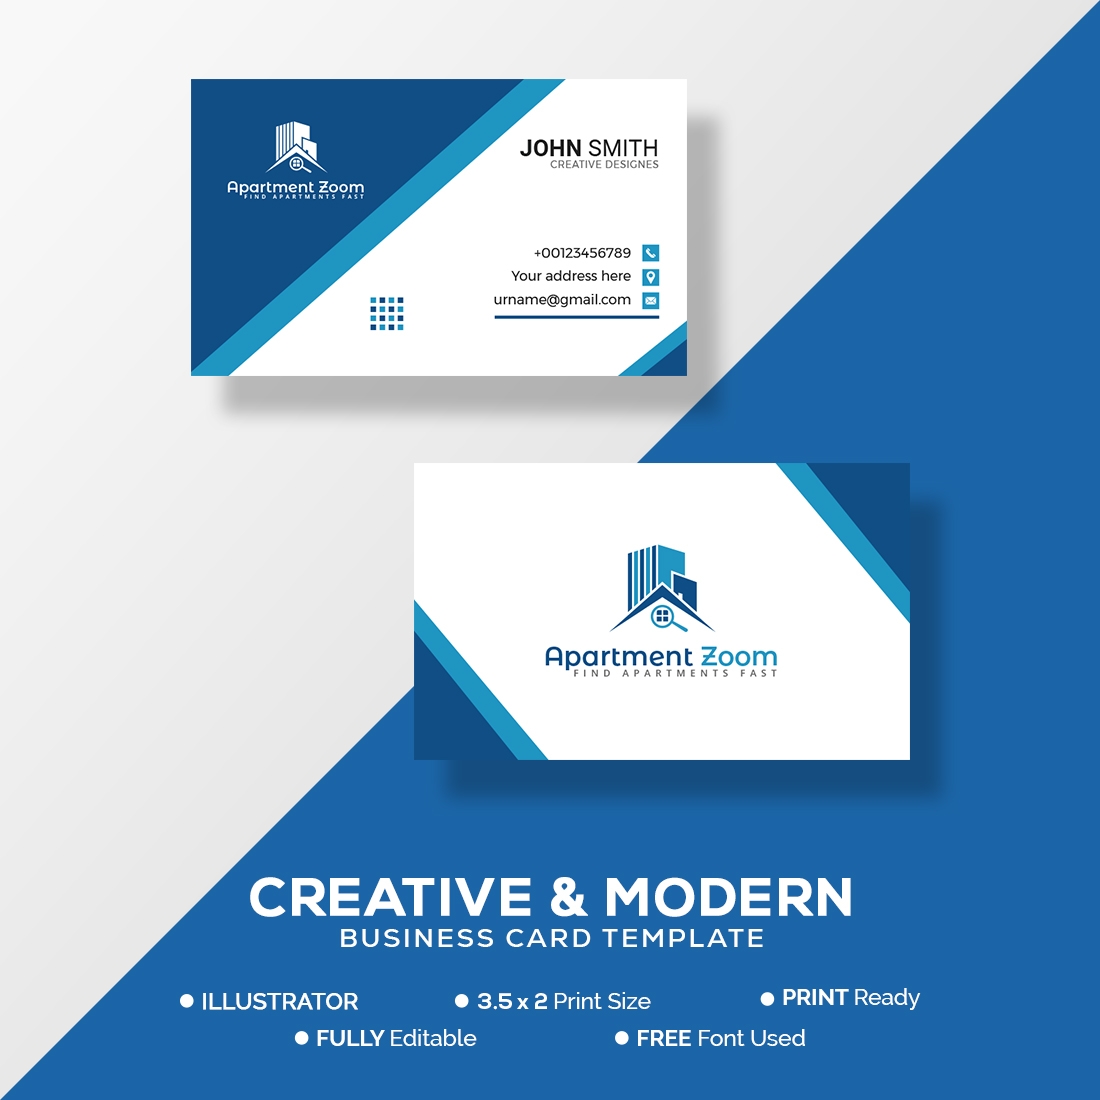 Business Card And Visiting Card Design For Print Ready MasterBundles - Free Printable Business Card Templates For Teachers